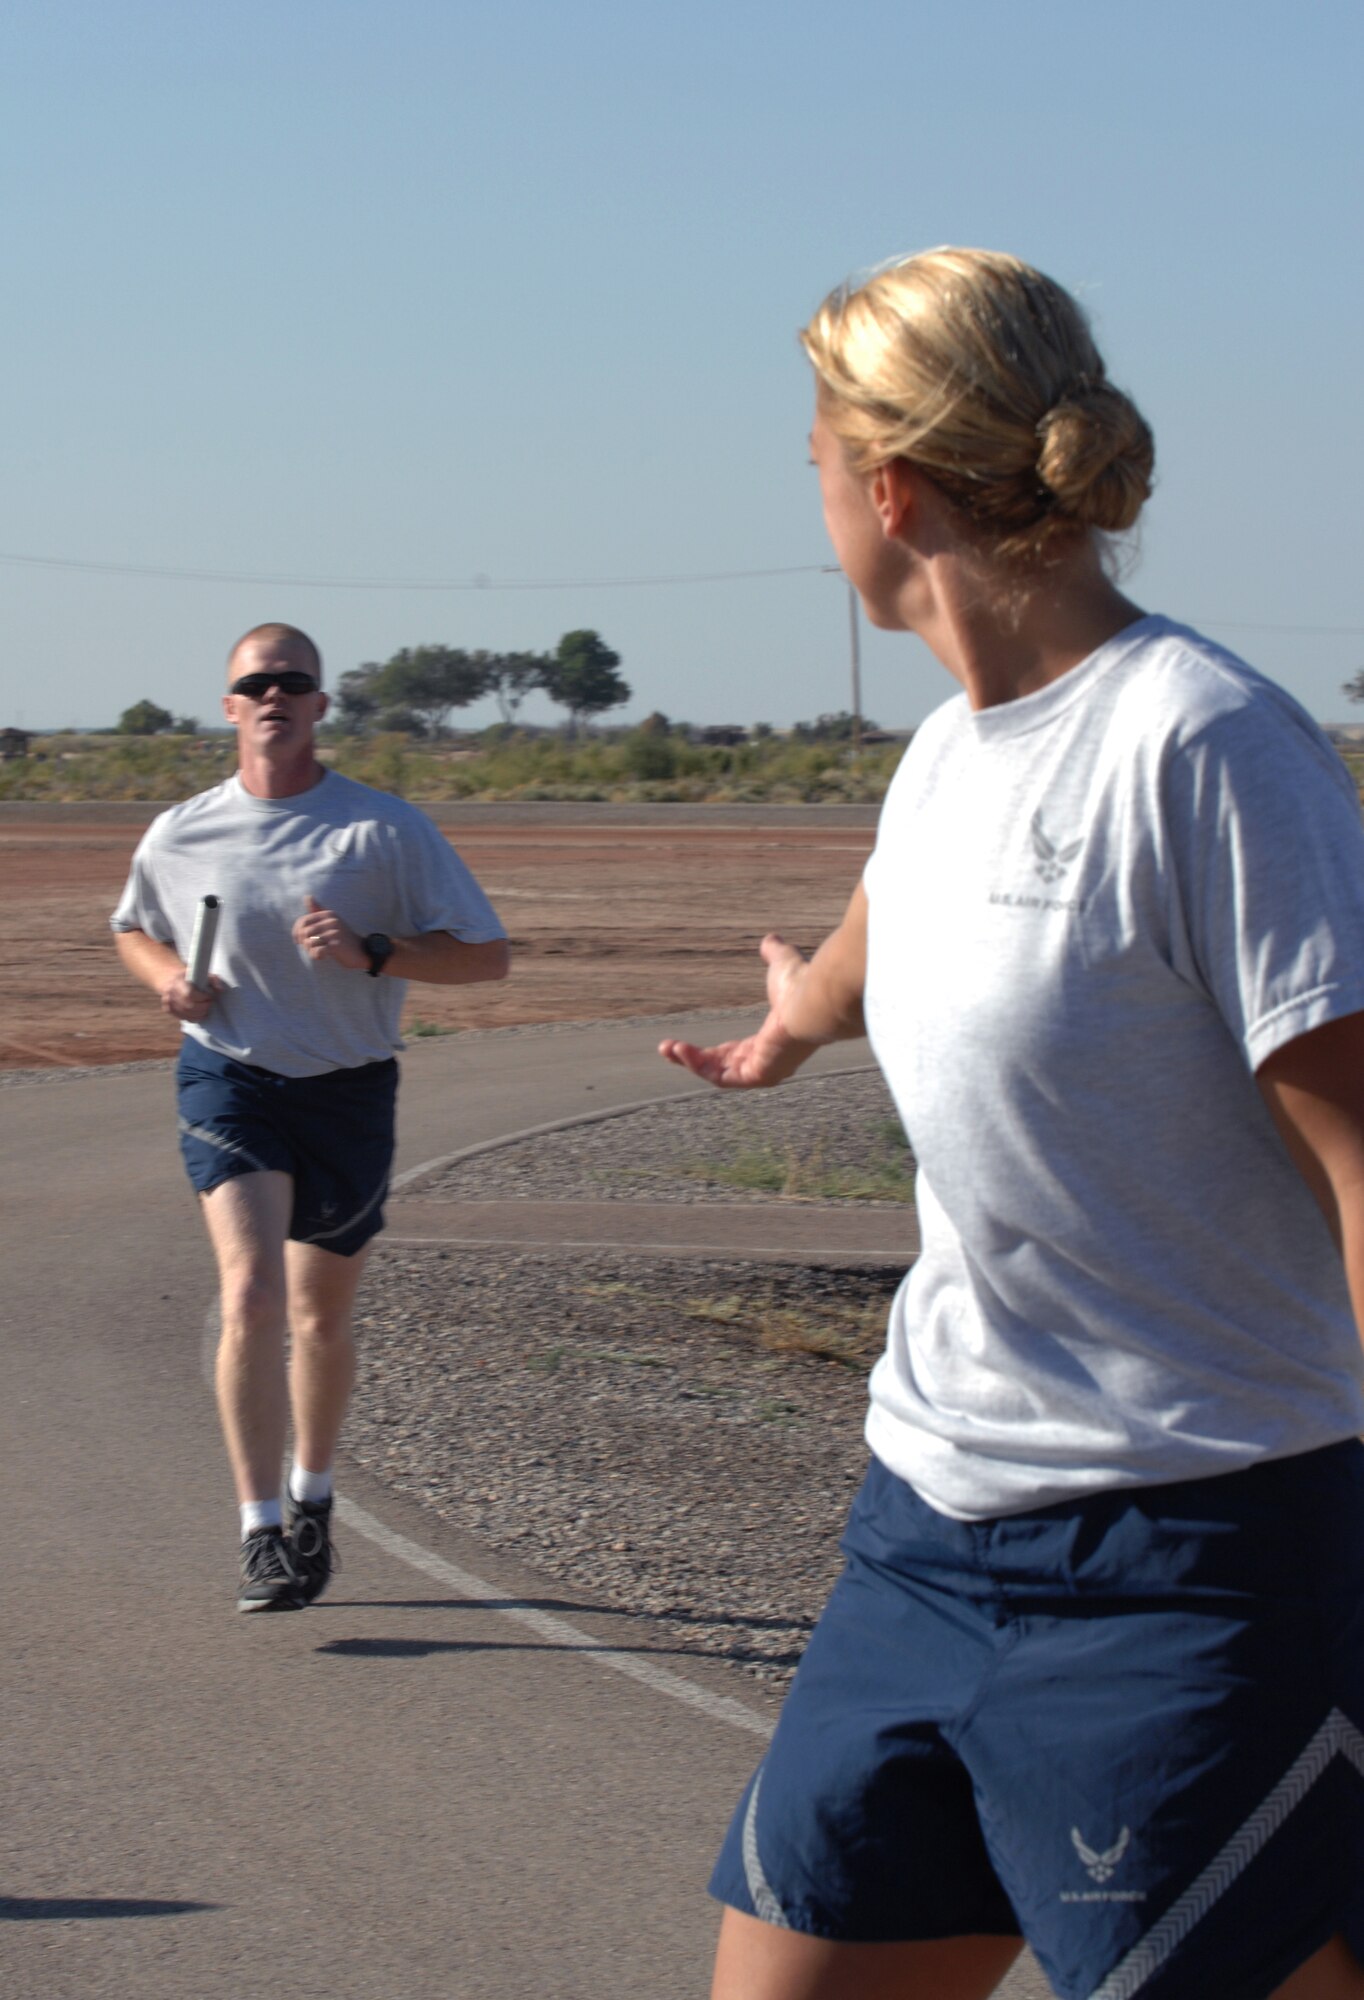 Tech. Sgt. Brady McCoy, 49th Security Forces Squadron, finishes up his run and prepares to hand off the baton to Tech. Sgt. Heather Huckins, also 49th SFS, during the three-mile-relay on Sports Day at Holloman Air Force Base, N.M., October 10. (U.S. Air Force photo/Airman Sondra M. Escutia)